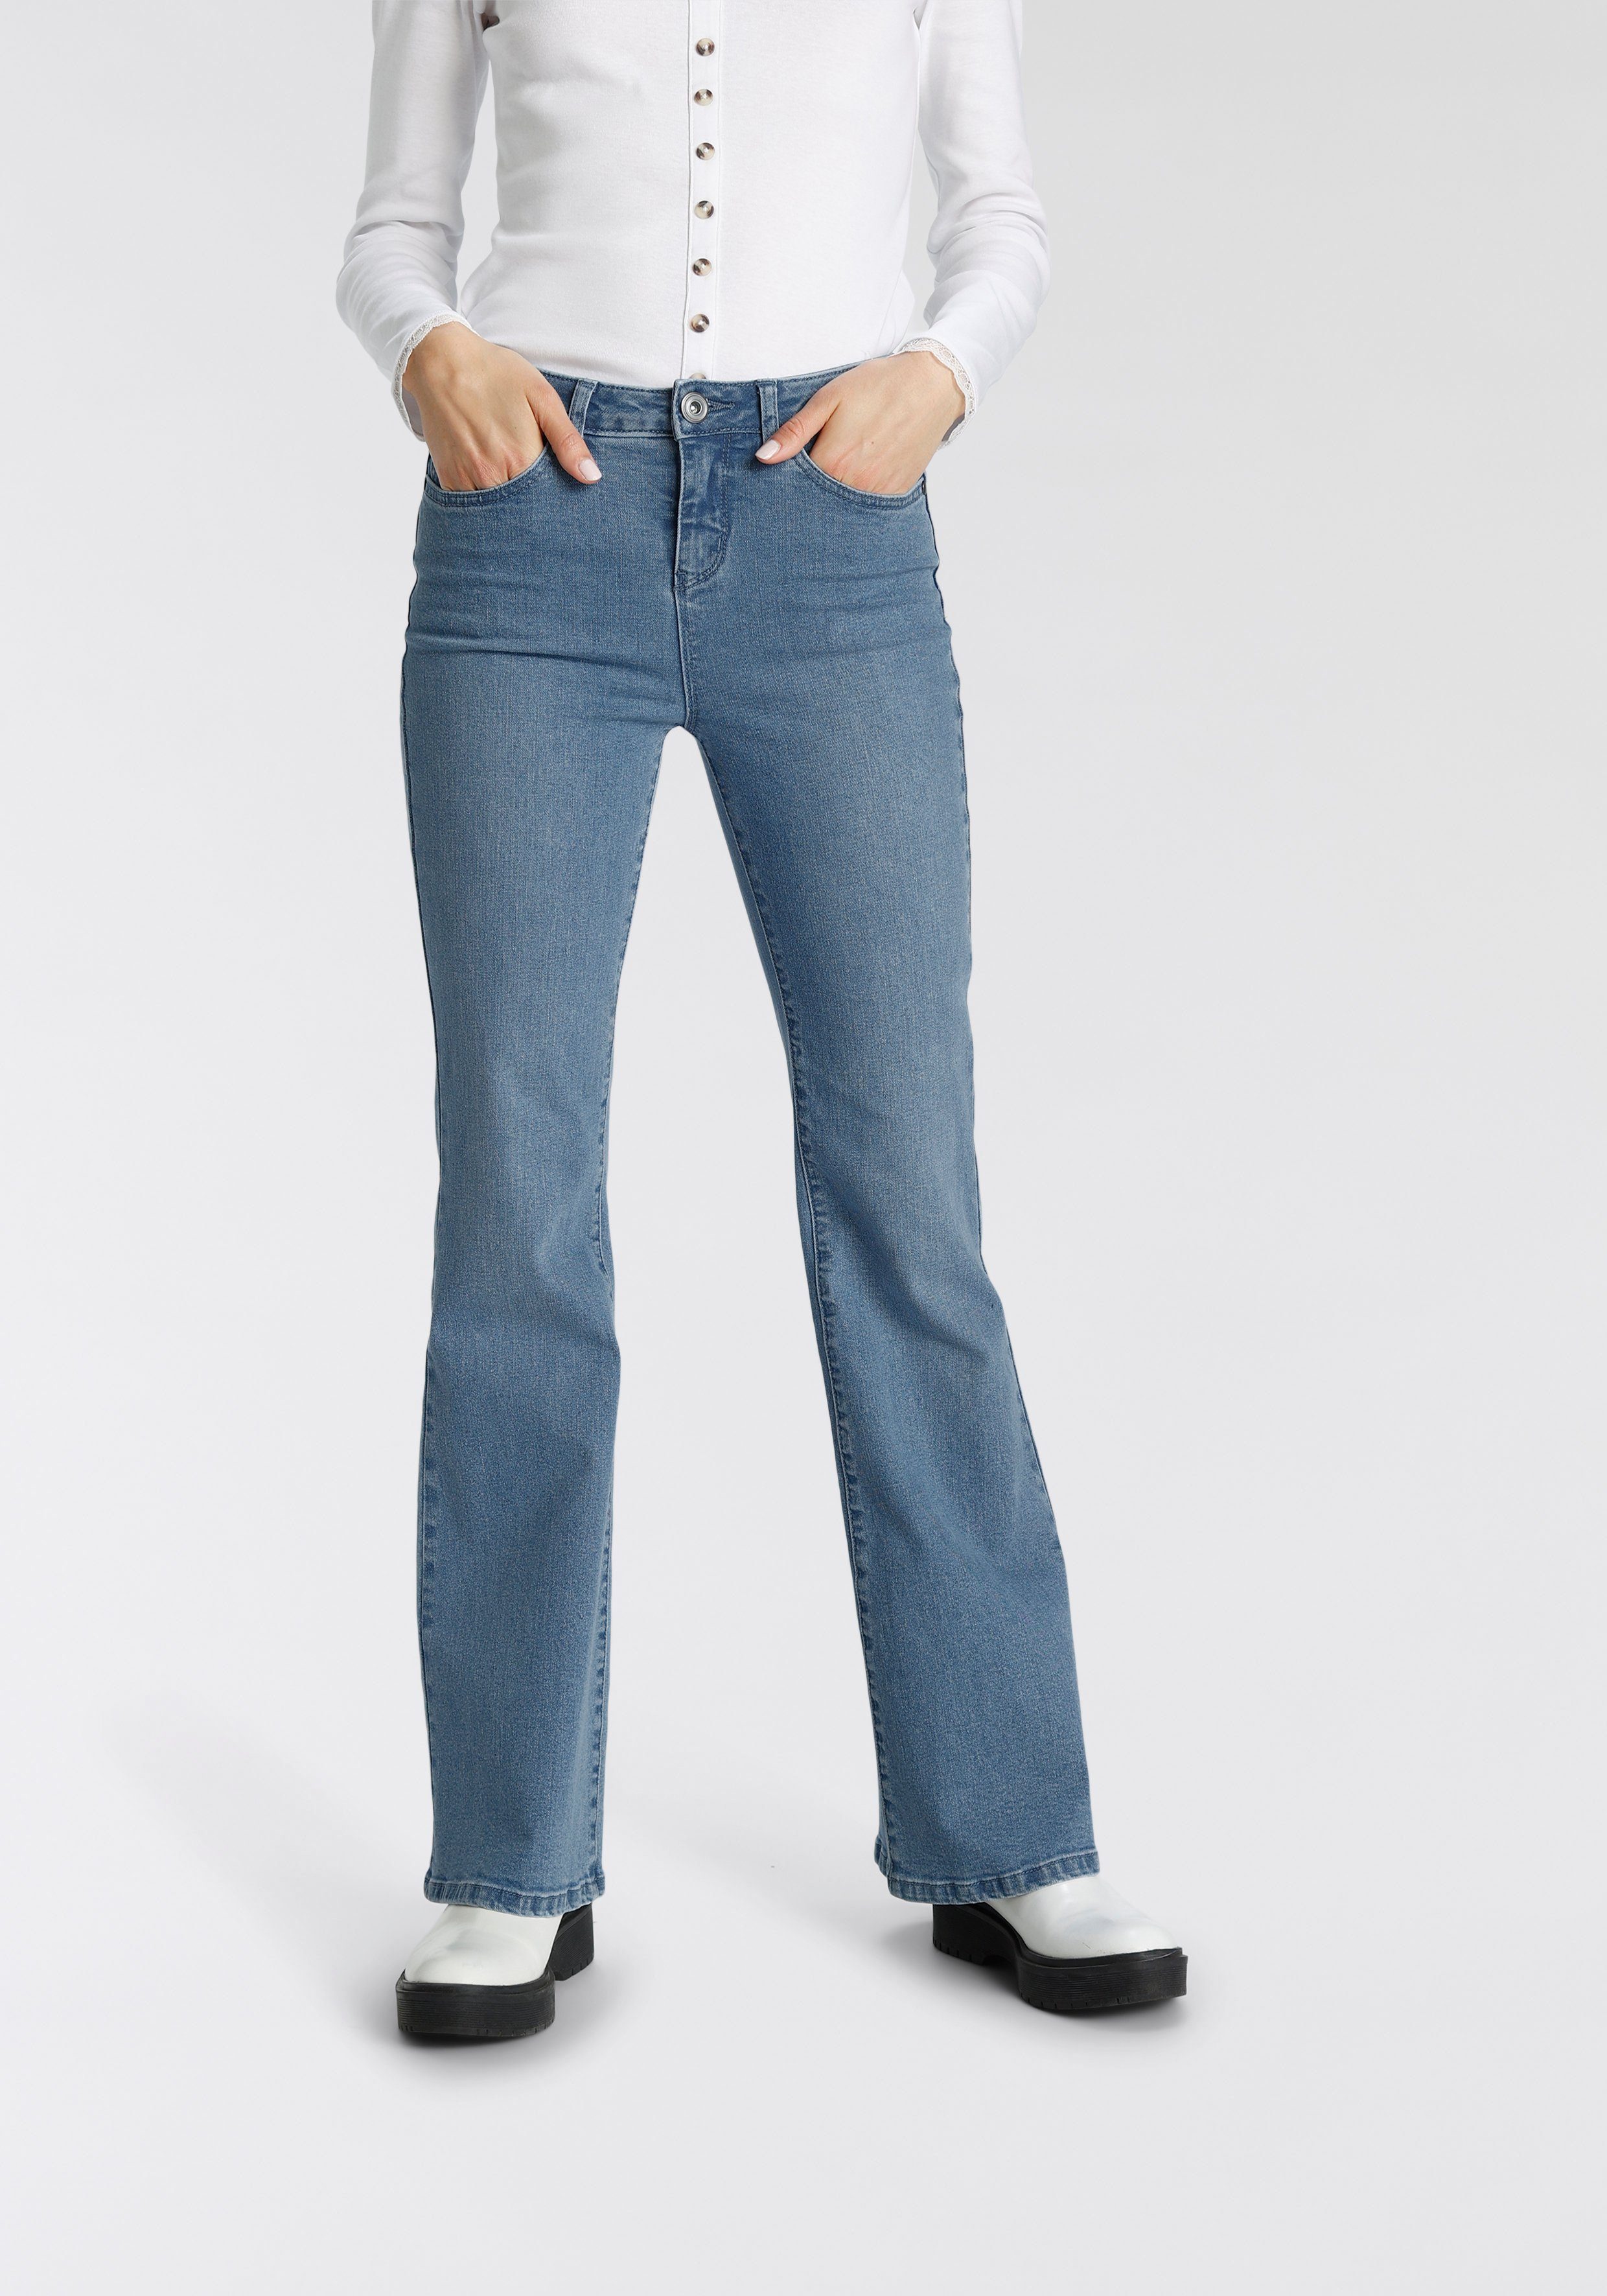 5-Pocket-Style AJC Form High-waist-Jeans im in Flared